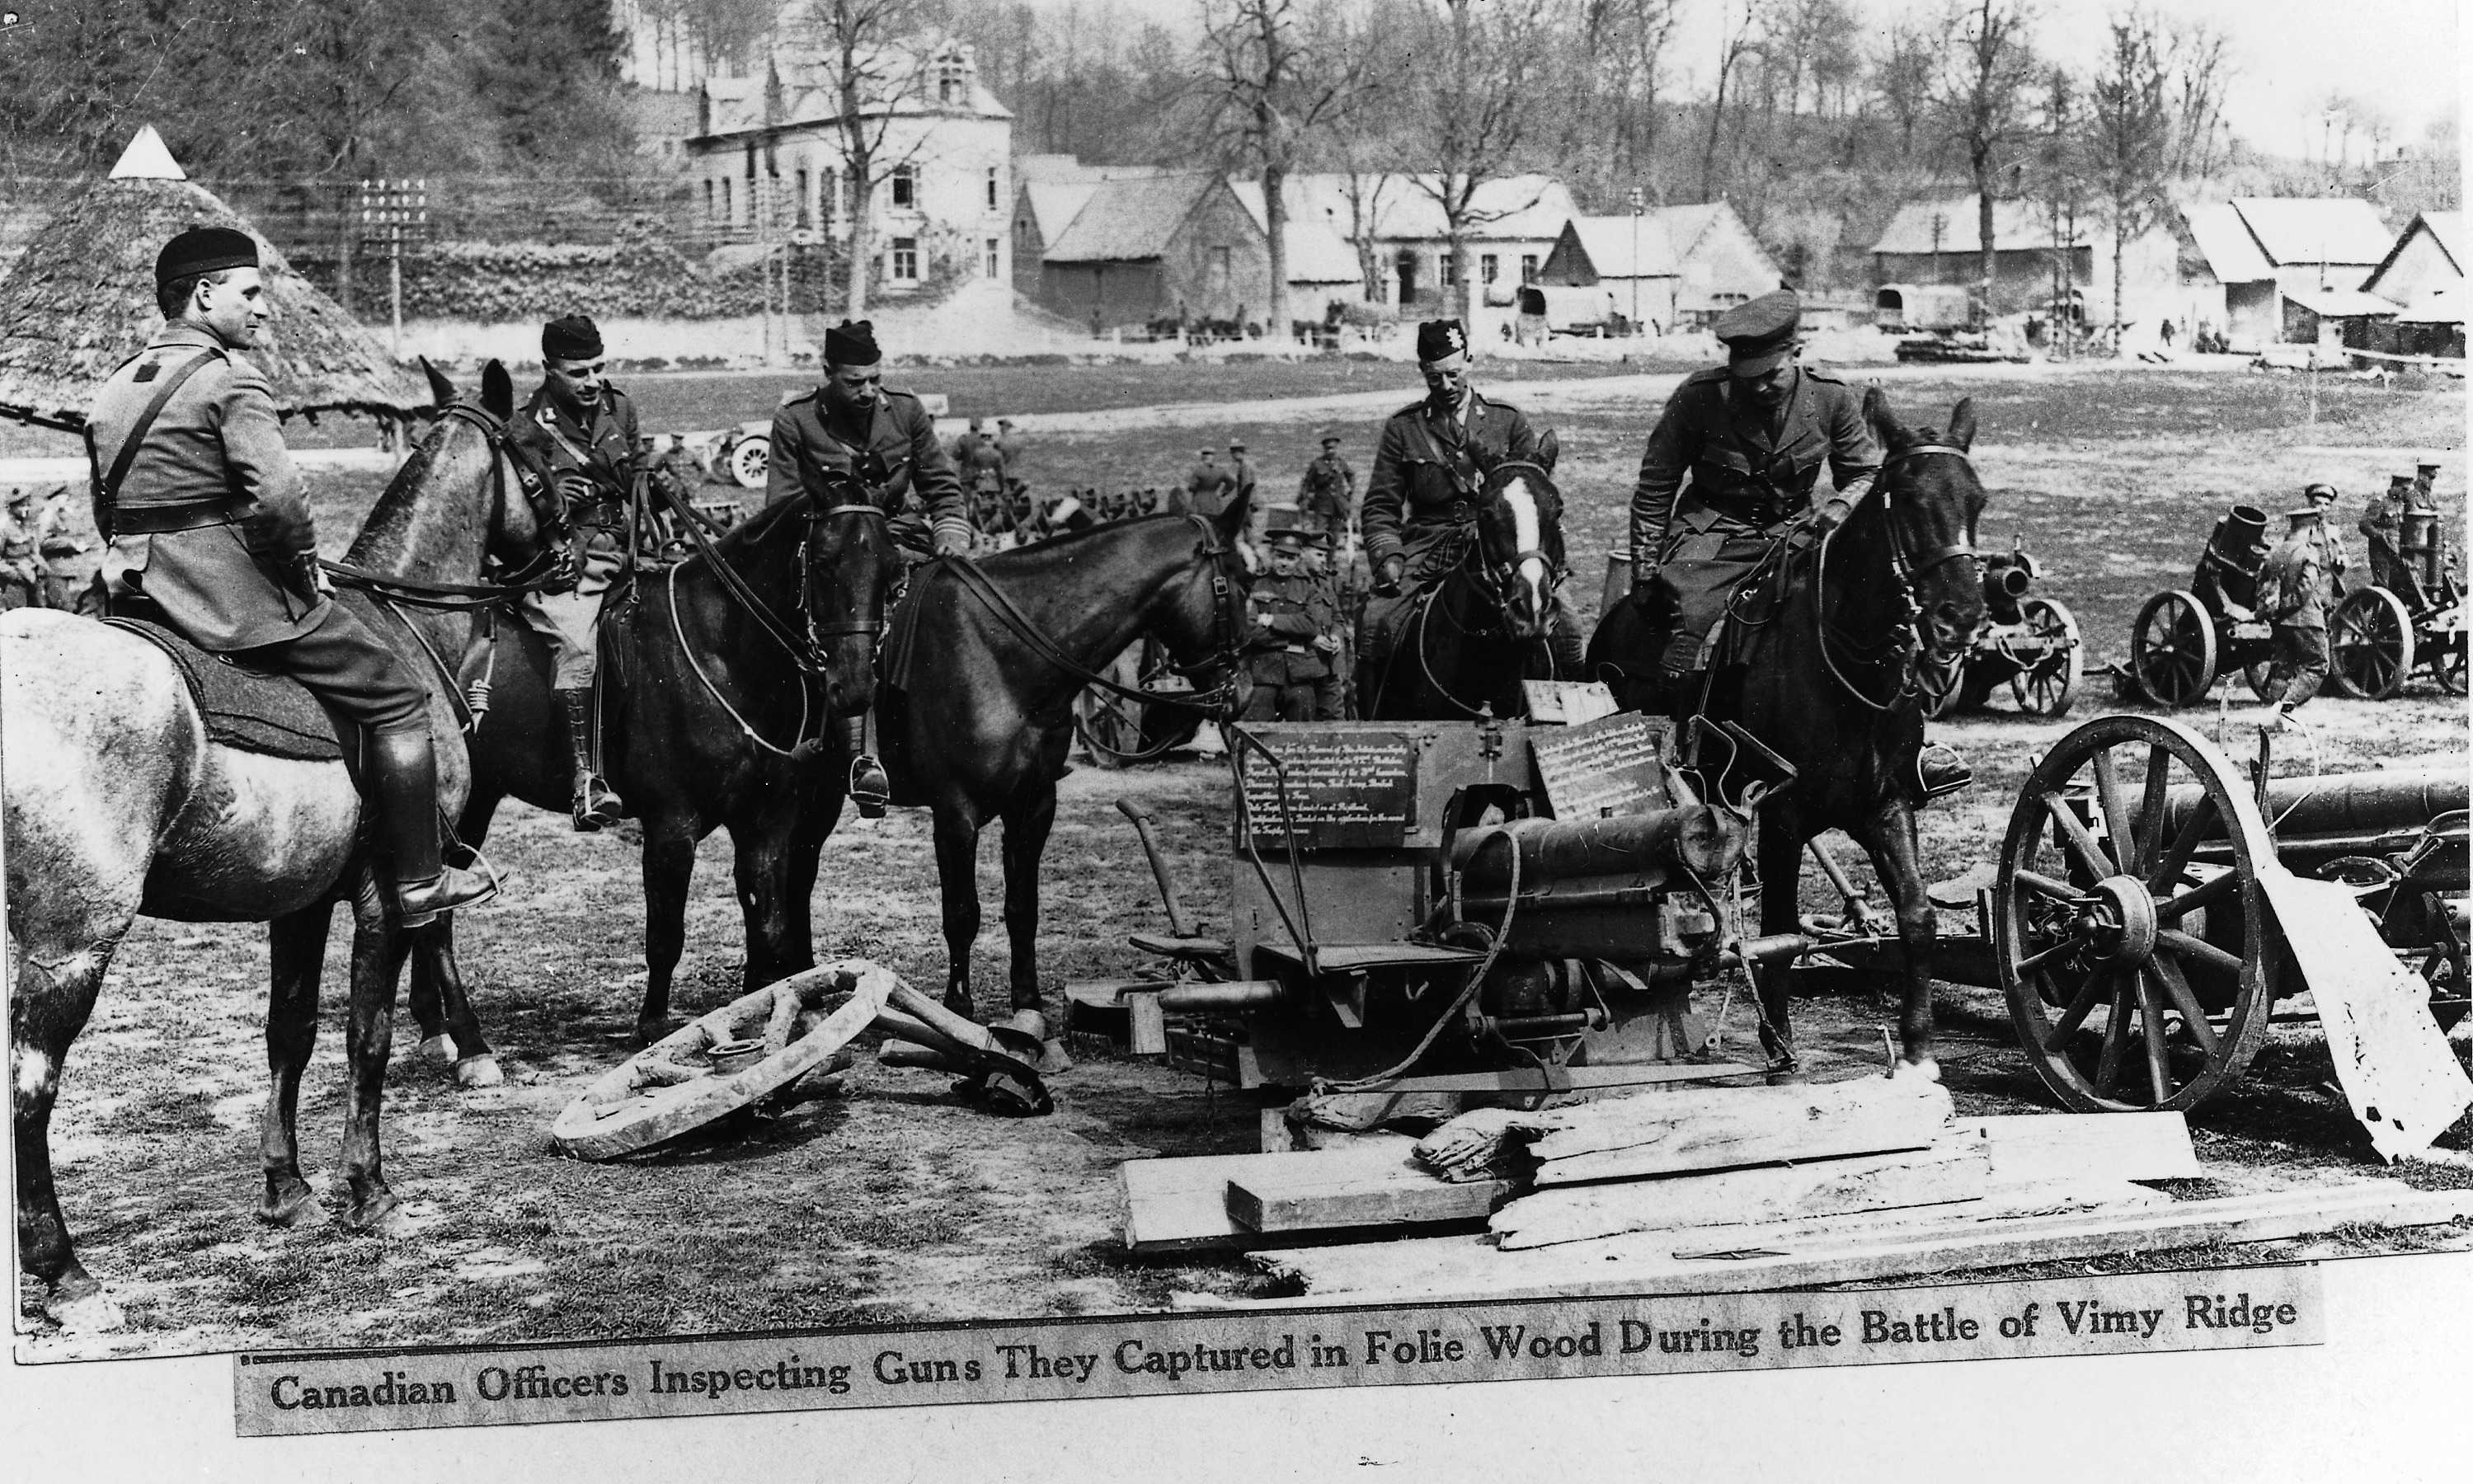 Black and white photograph. Men in military dress and sitting on horses look down over a pile of guns mounted on wheels for easy movement. There are piles of large pieces of wood on the ground, and a village visible in the distance behind them.